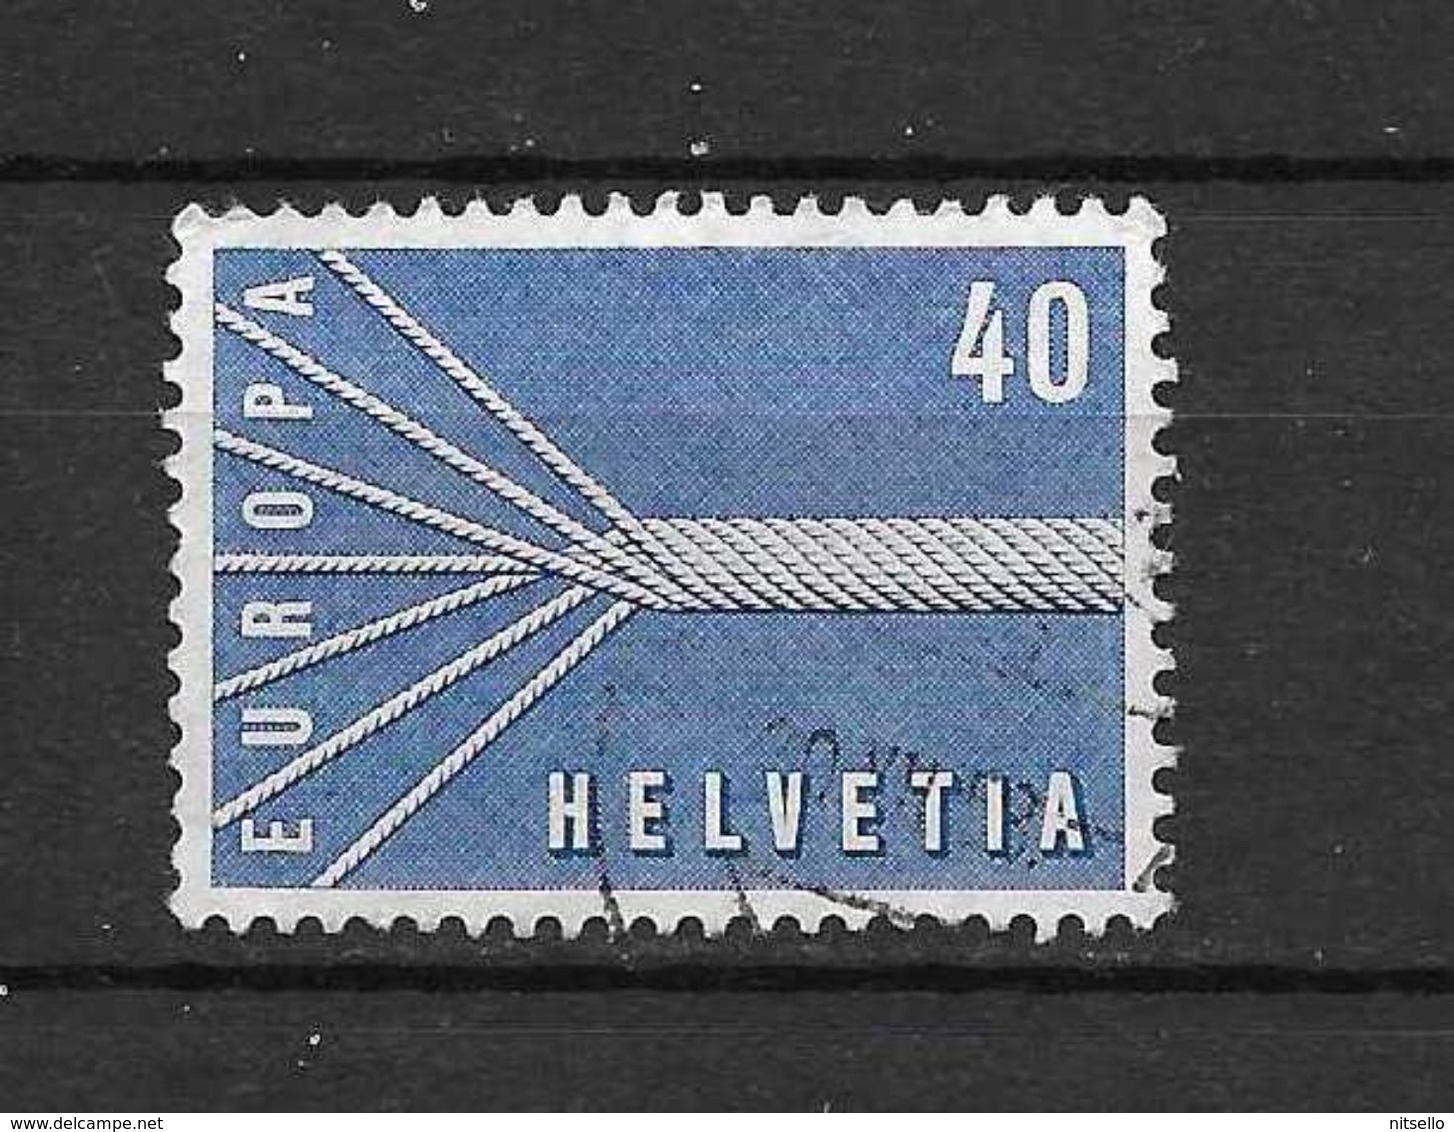 LOTE 1375  ///  (C003)  SUIZA  1957   YVERT Nº: 596   ¡¡¡¡¡ LIQUIDATION !!!!!!! - Used Stamps